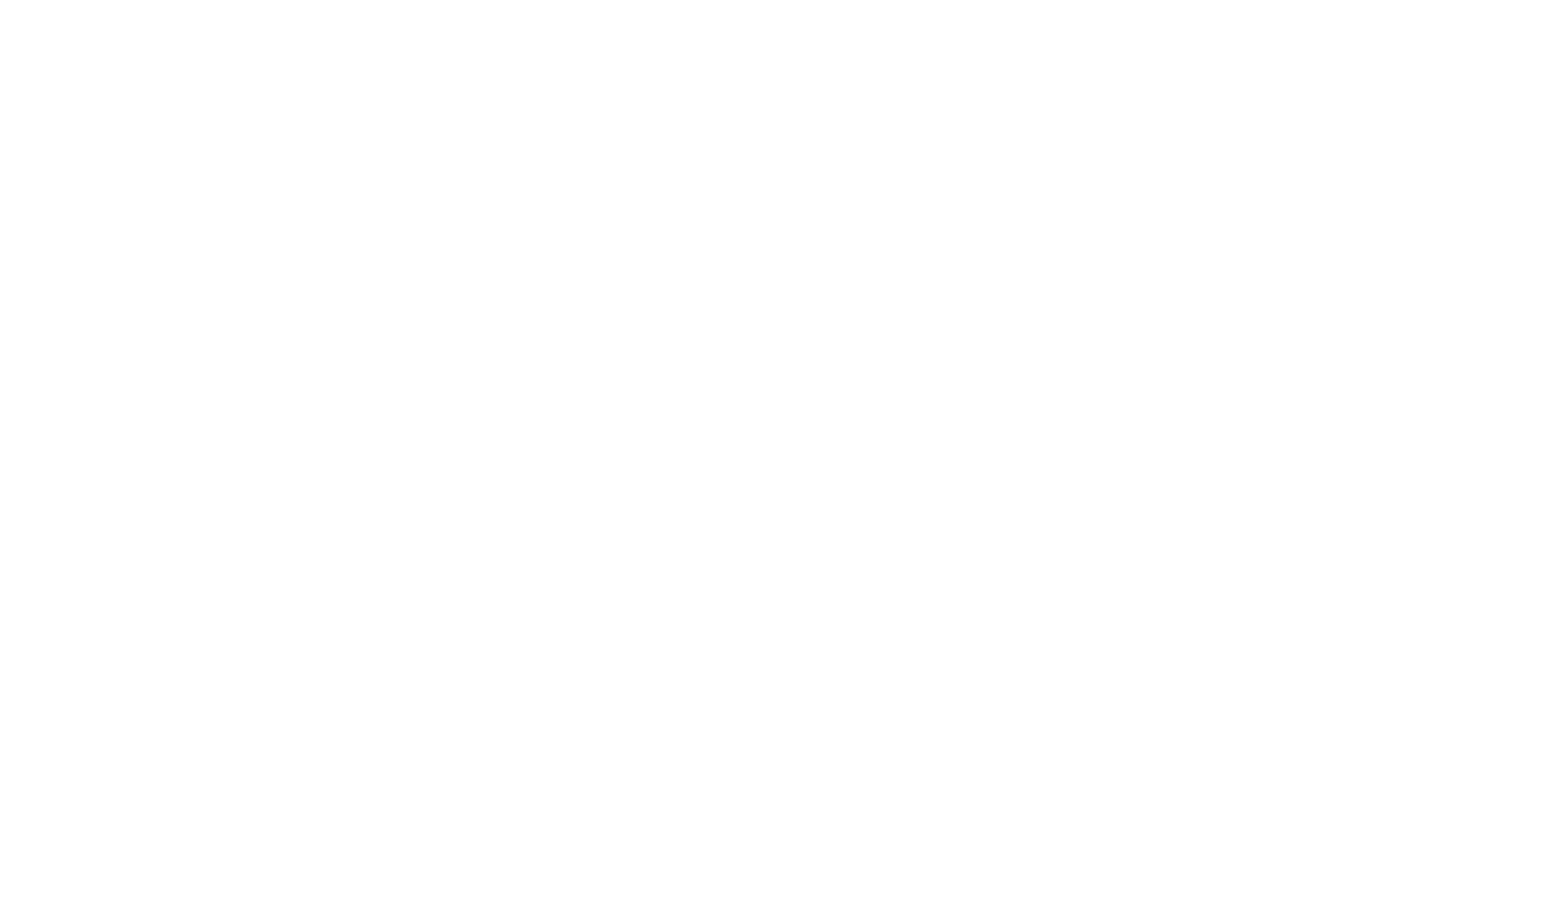 The Pennant Group logo for dark backgrounds (transparent PNG)